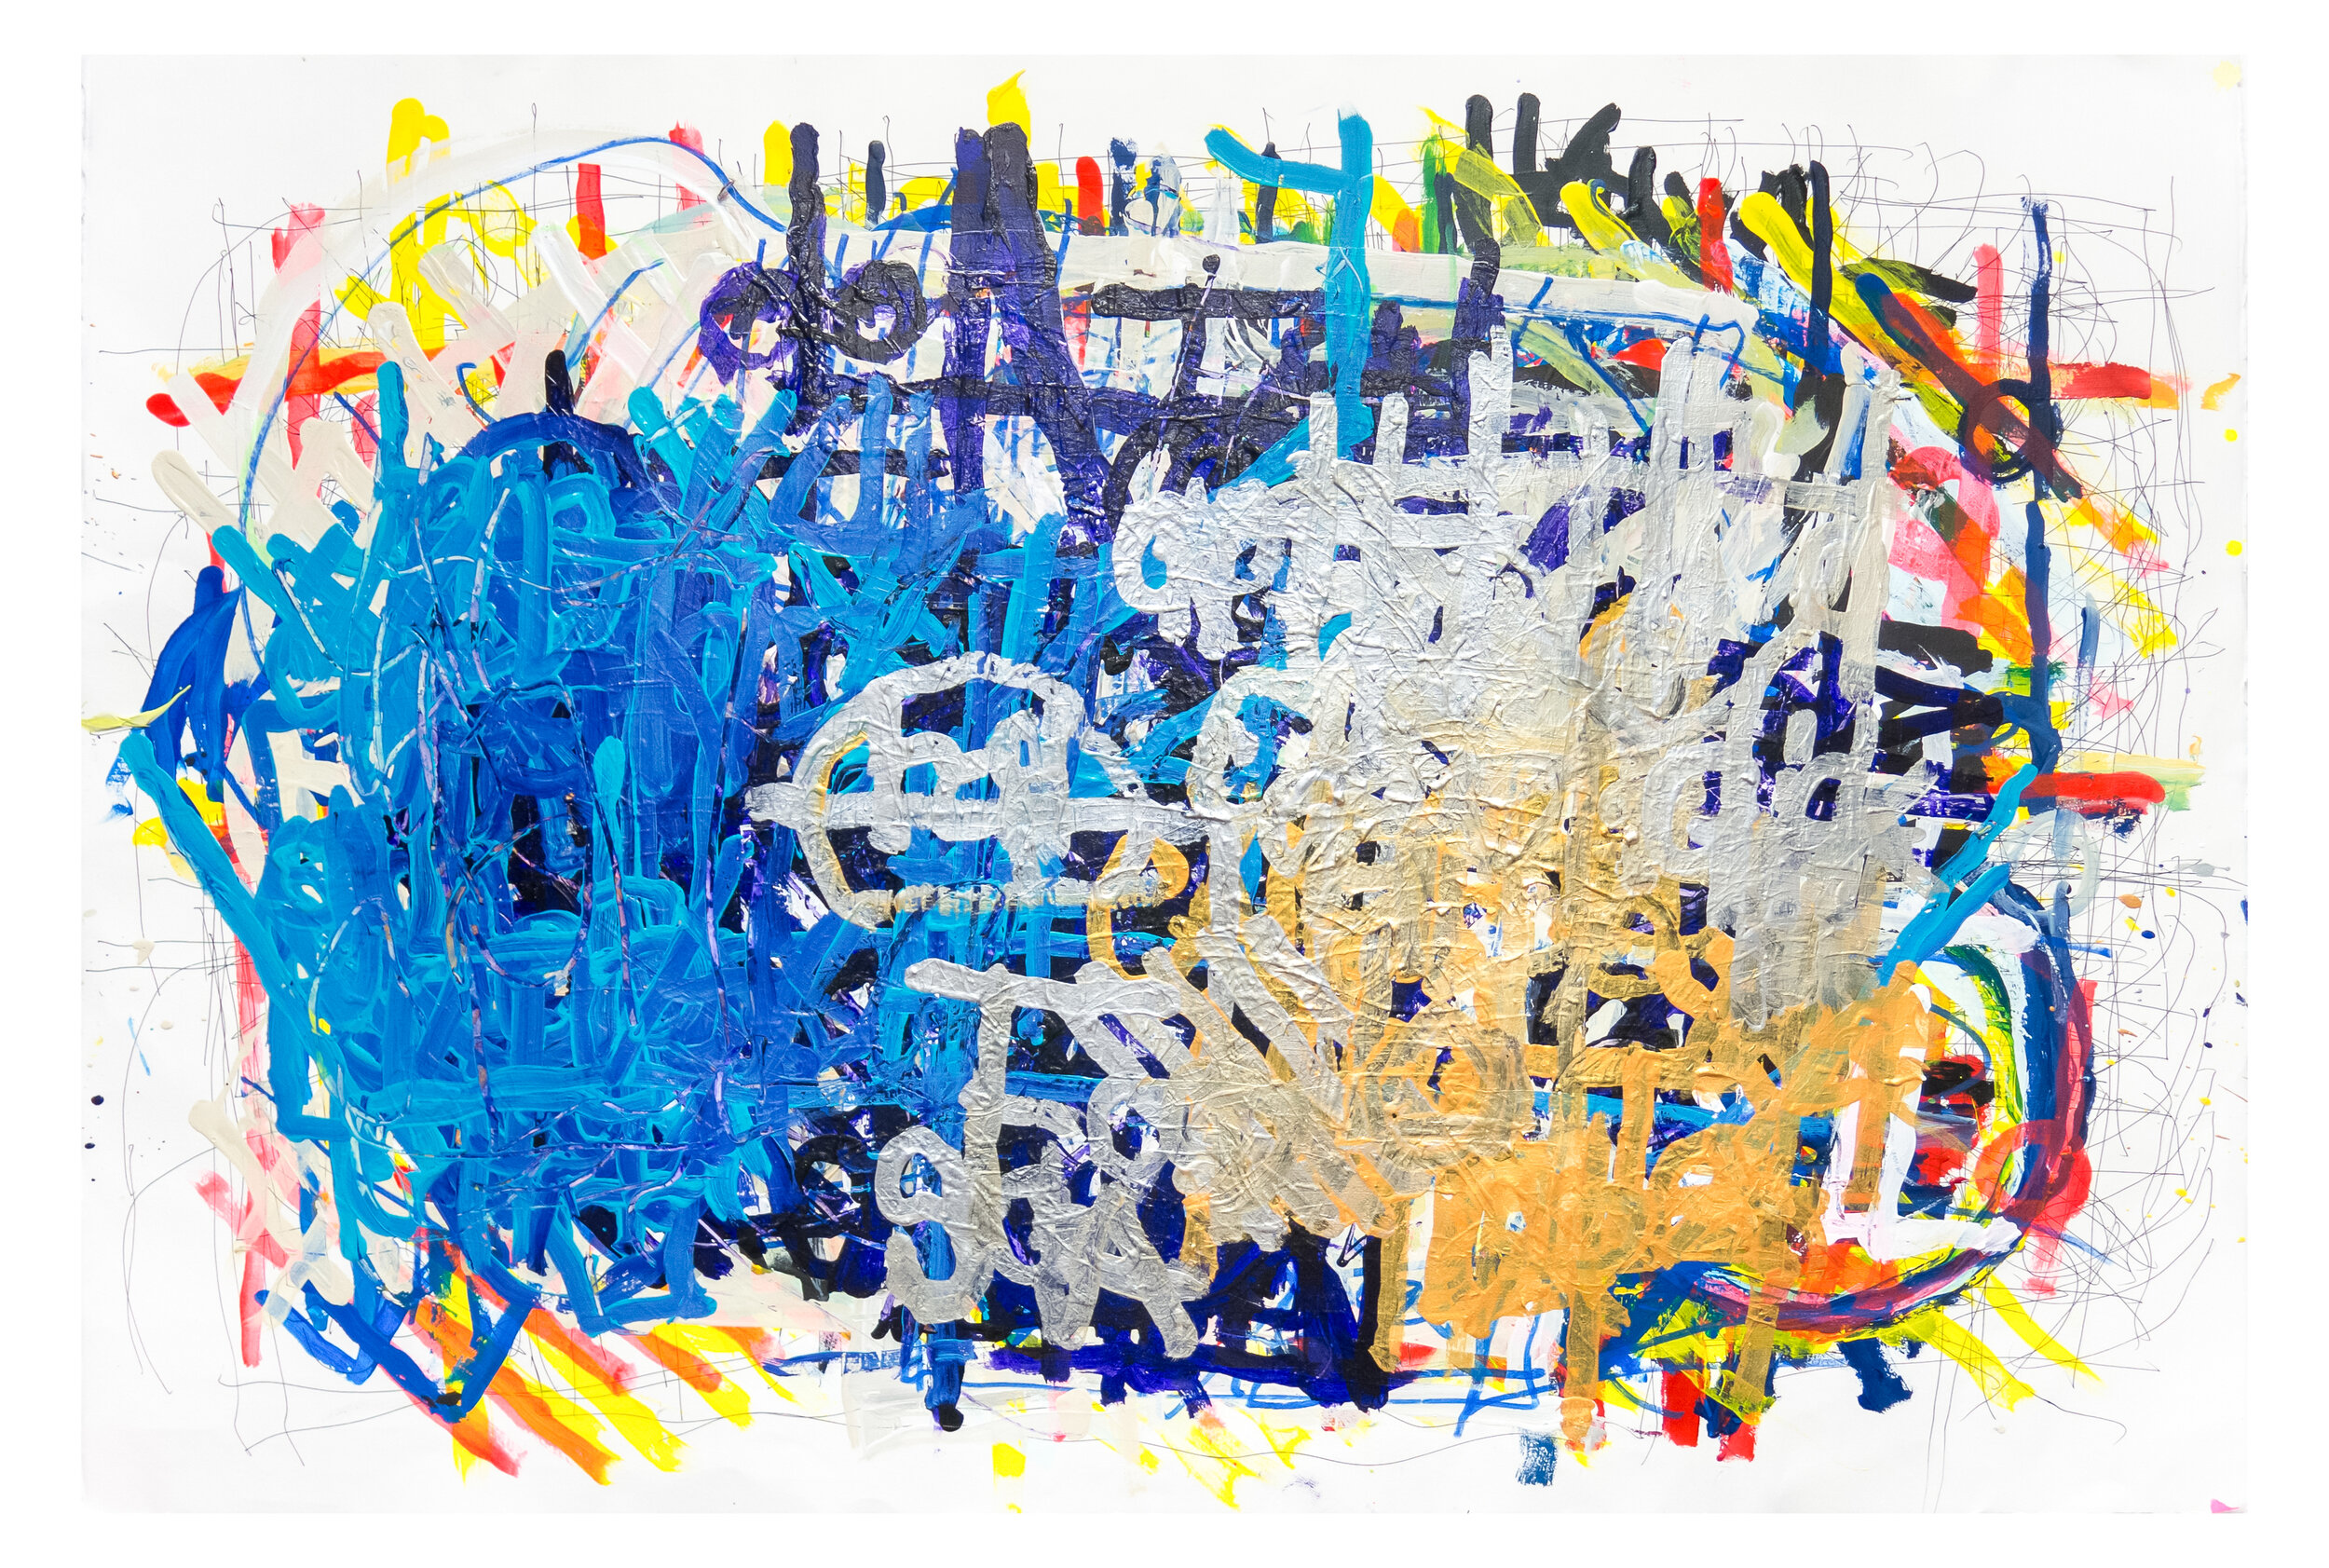 Dan Miller, Untitled (215_2015), 2015, 30x44.25 inches, acrylic and ink on paper